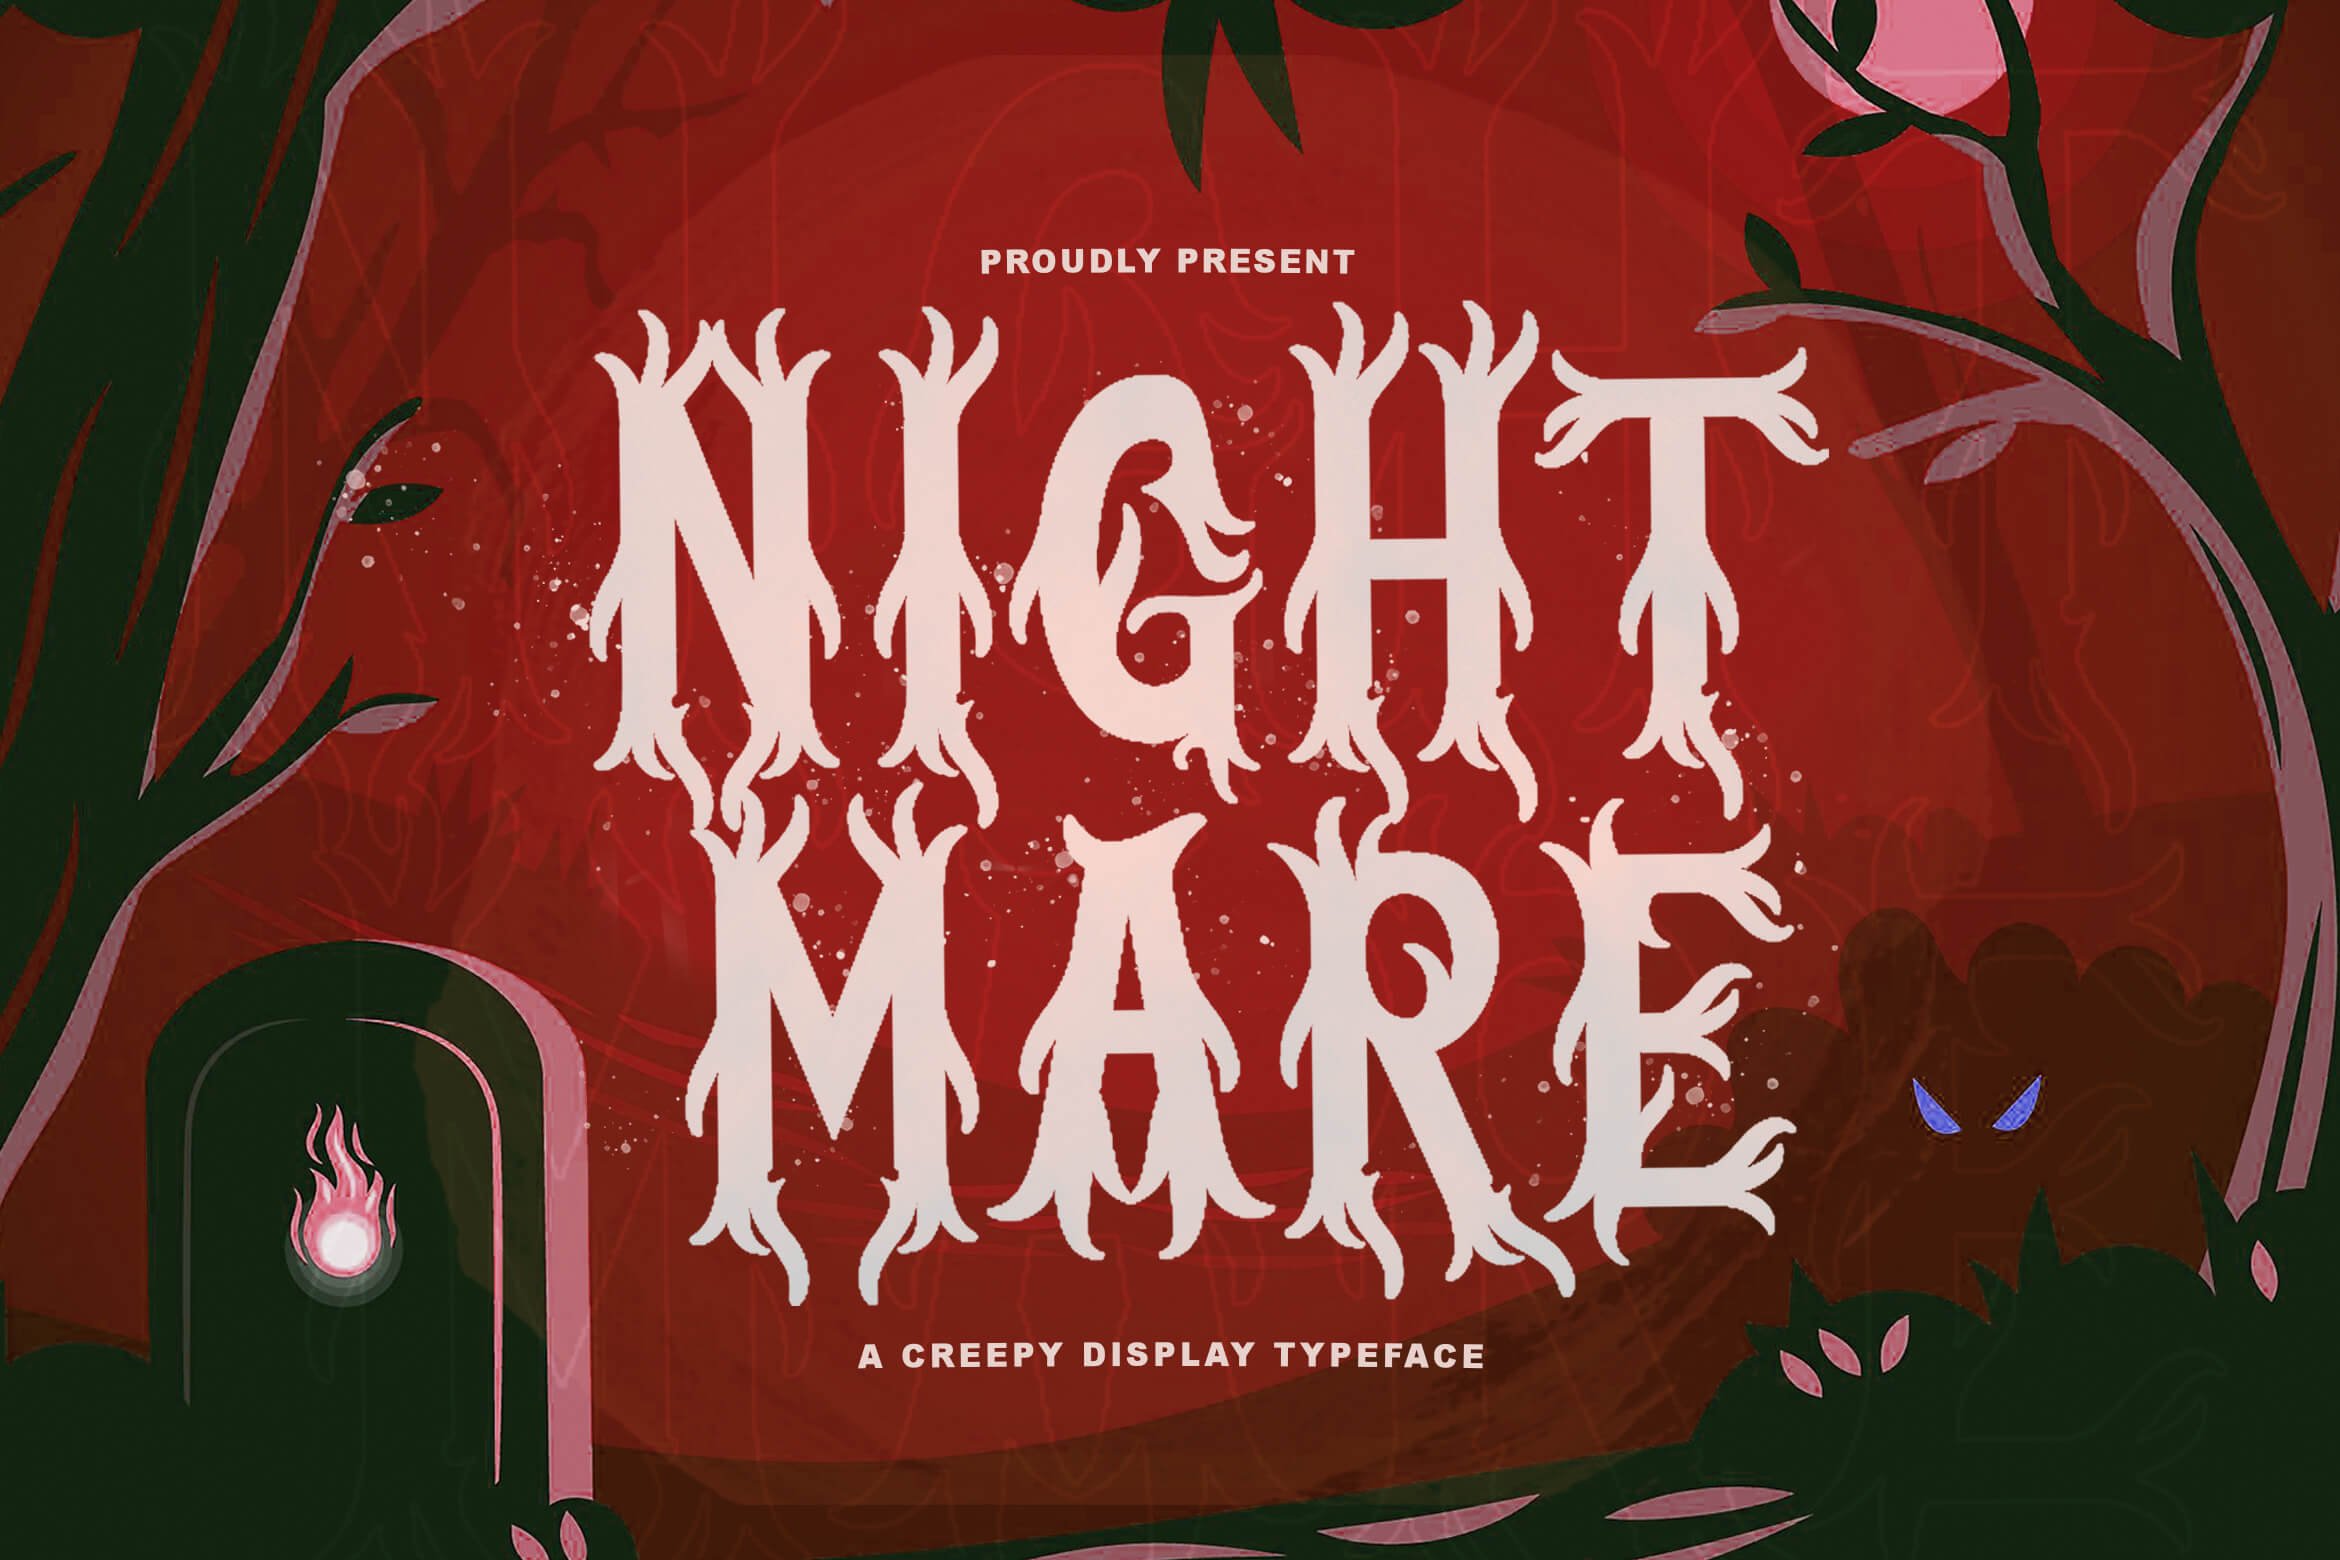 Nightmare - Horror Font cover image.